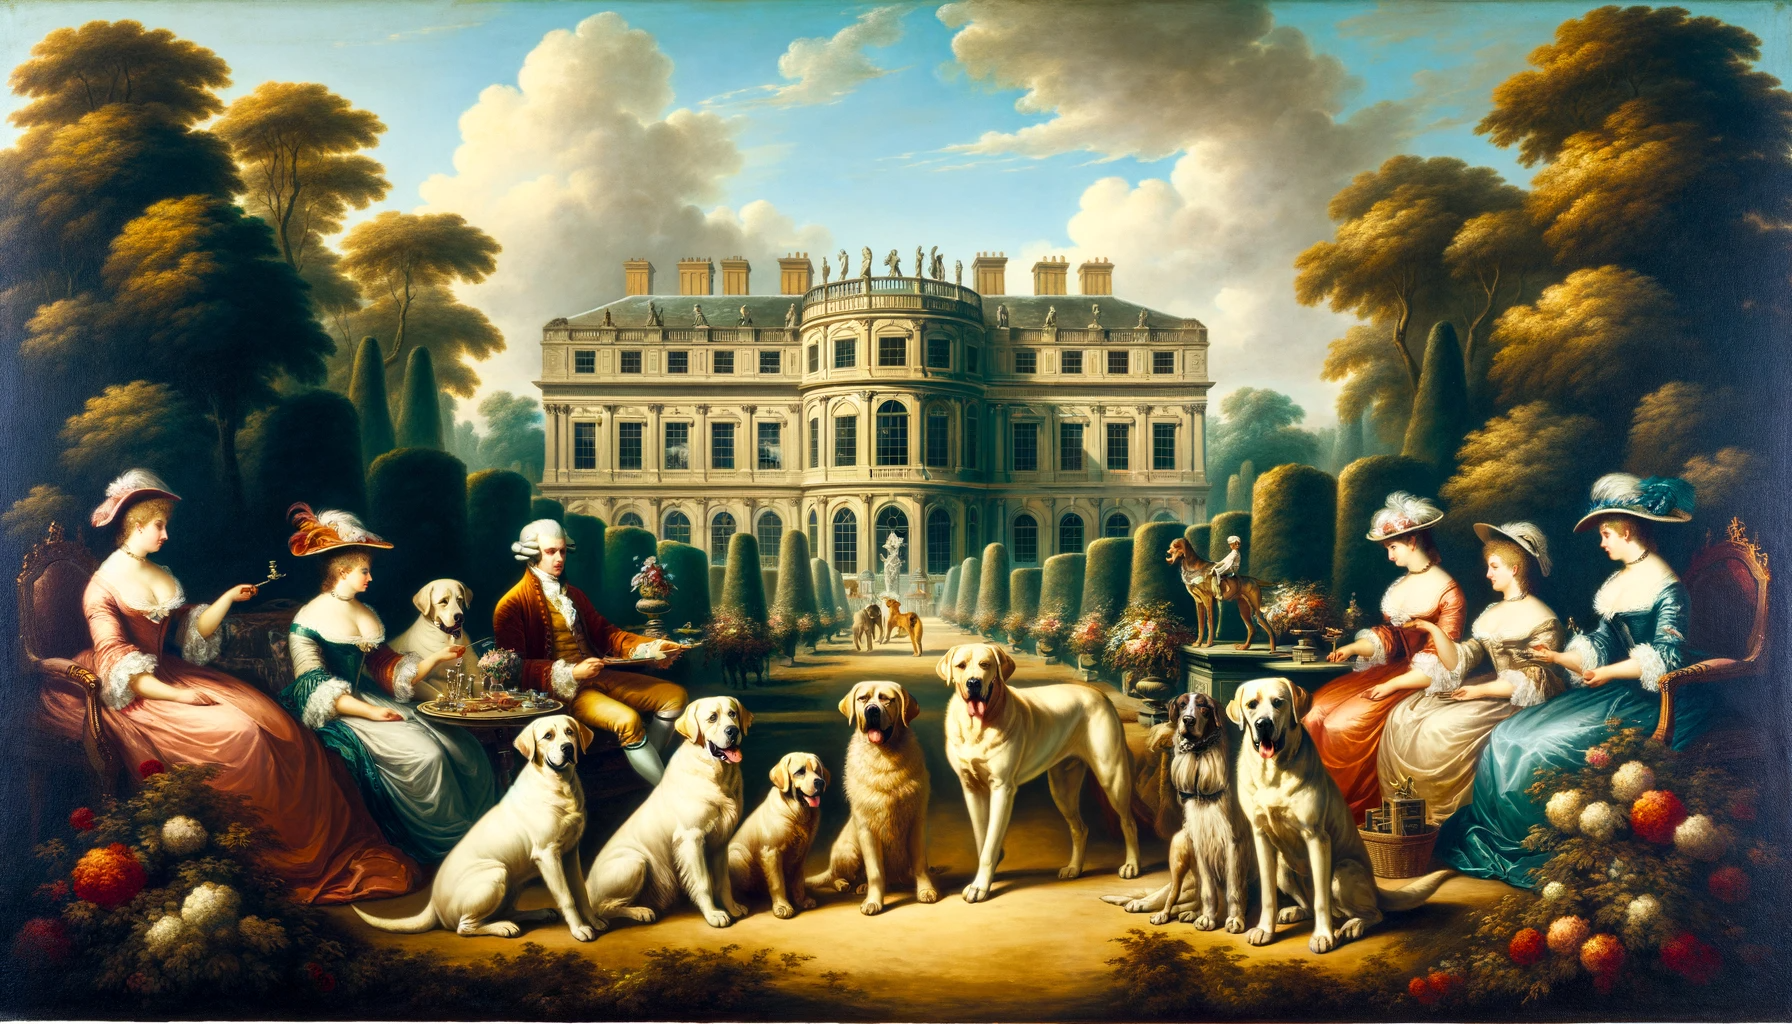 Historic painting of Labradors and Weimaraners in a regal estate, talk about royal lineage